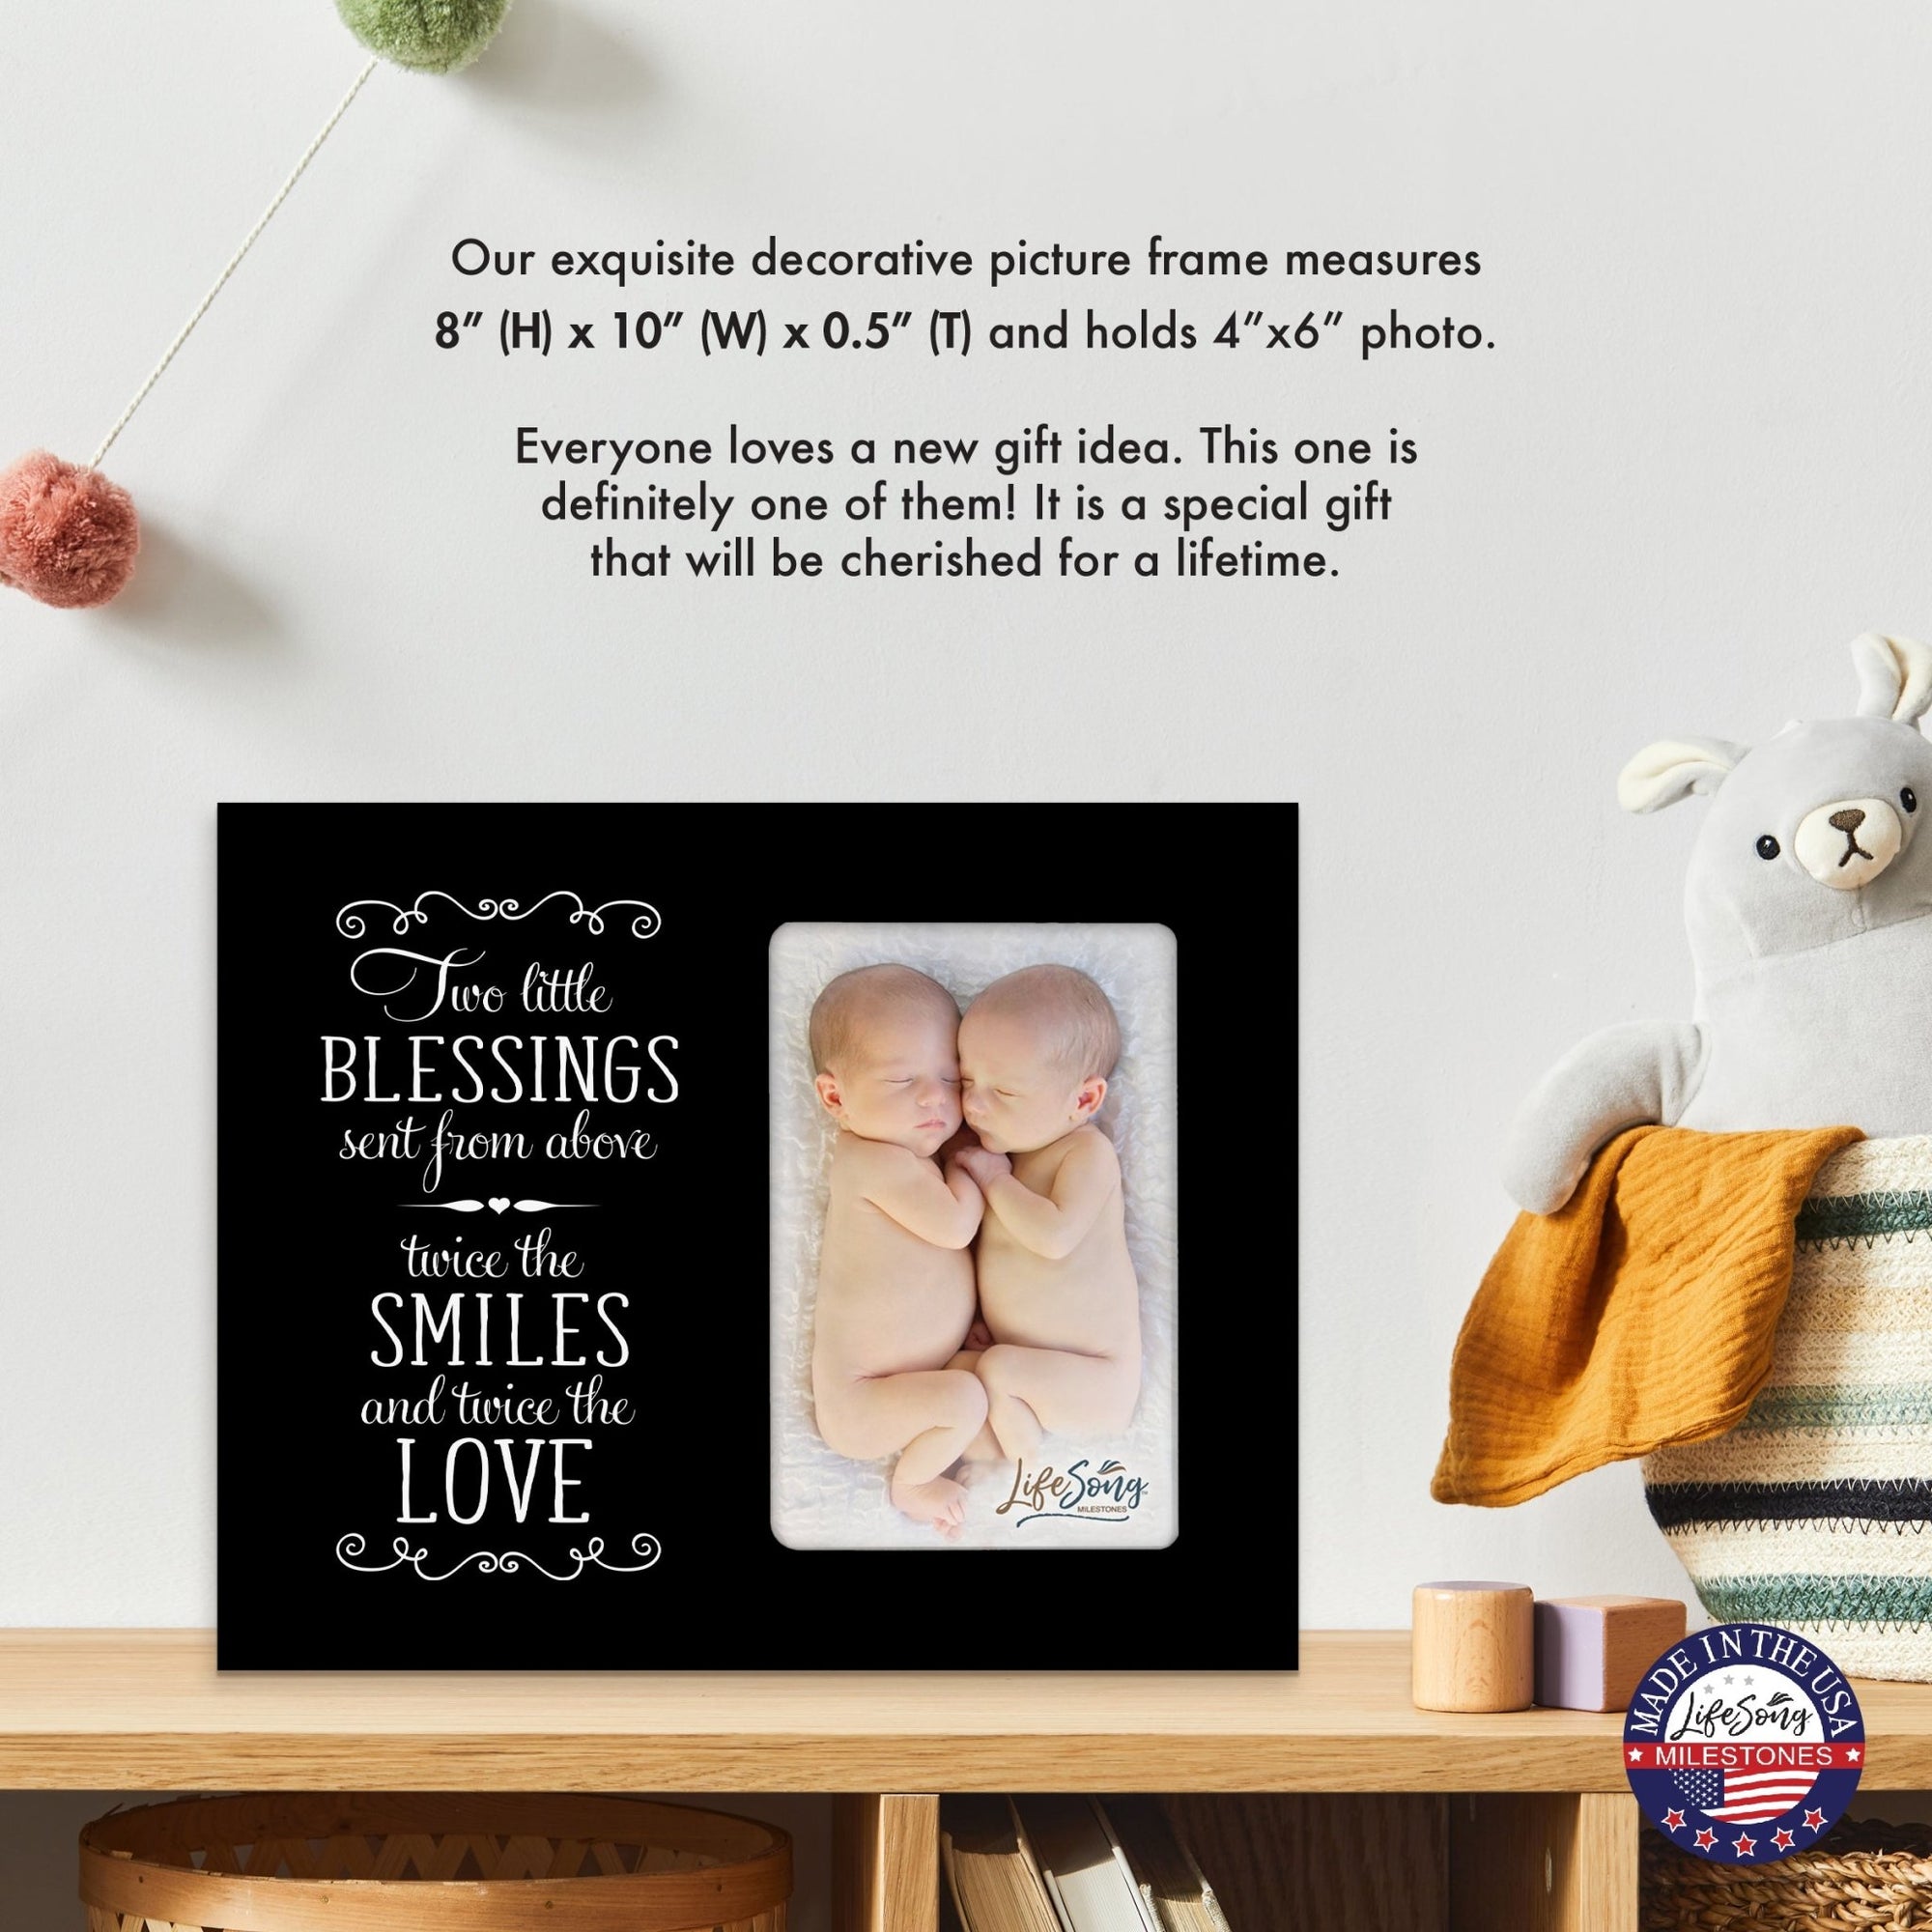 Cute Newborn Baby Twins Announcement Wooden Wall And Tabletop Photo Frame For New Parents Gift Ideas - LifeSong Milestones